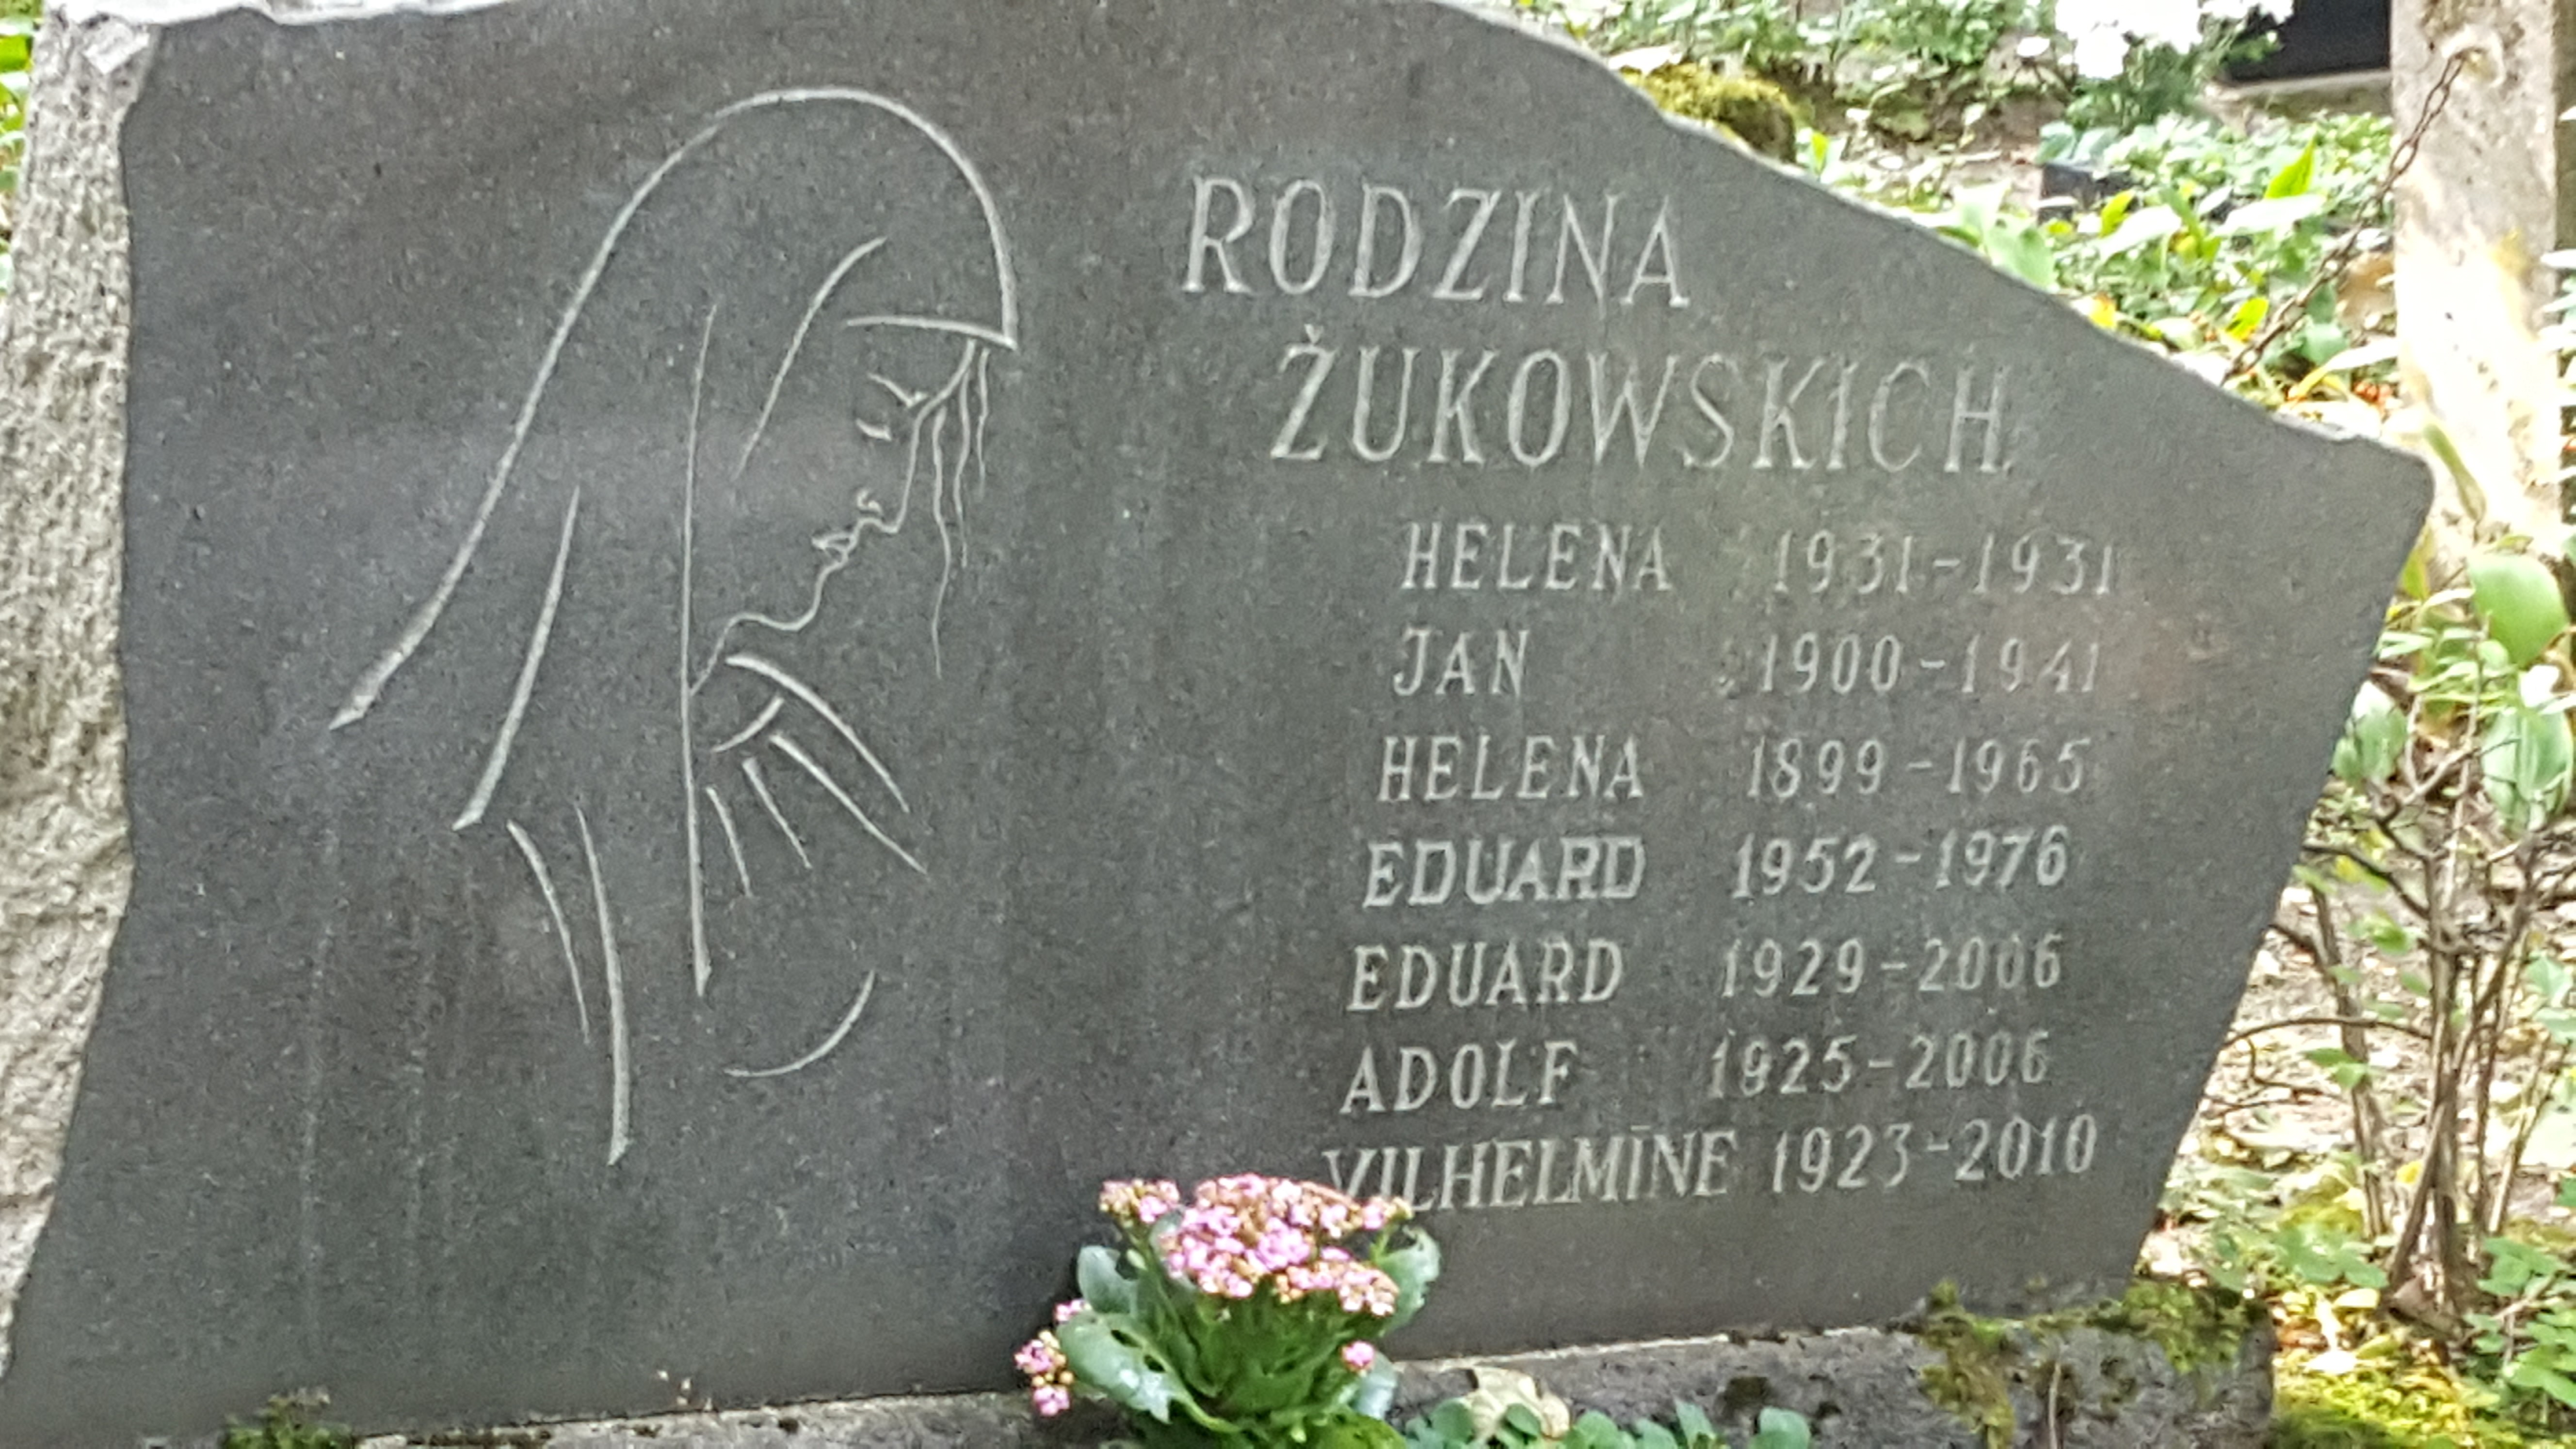 Tombstone of the Zhukovskis, St Michael's cemetery in Riga, as of 2021.